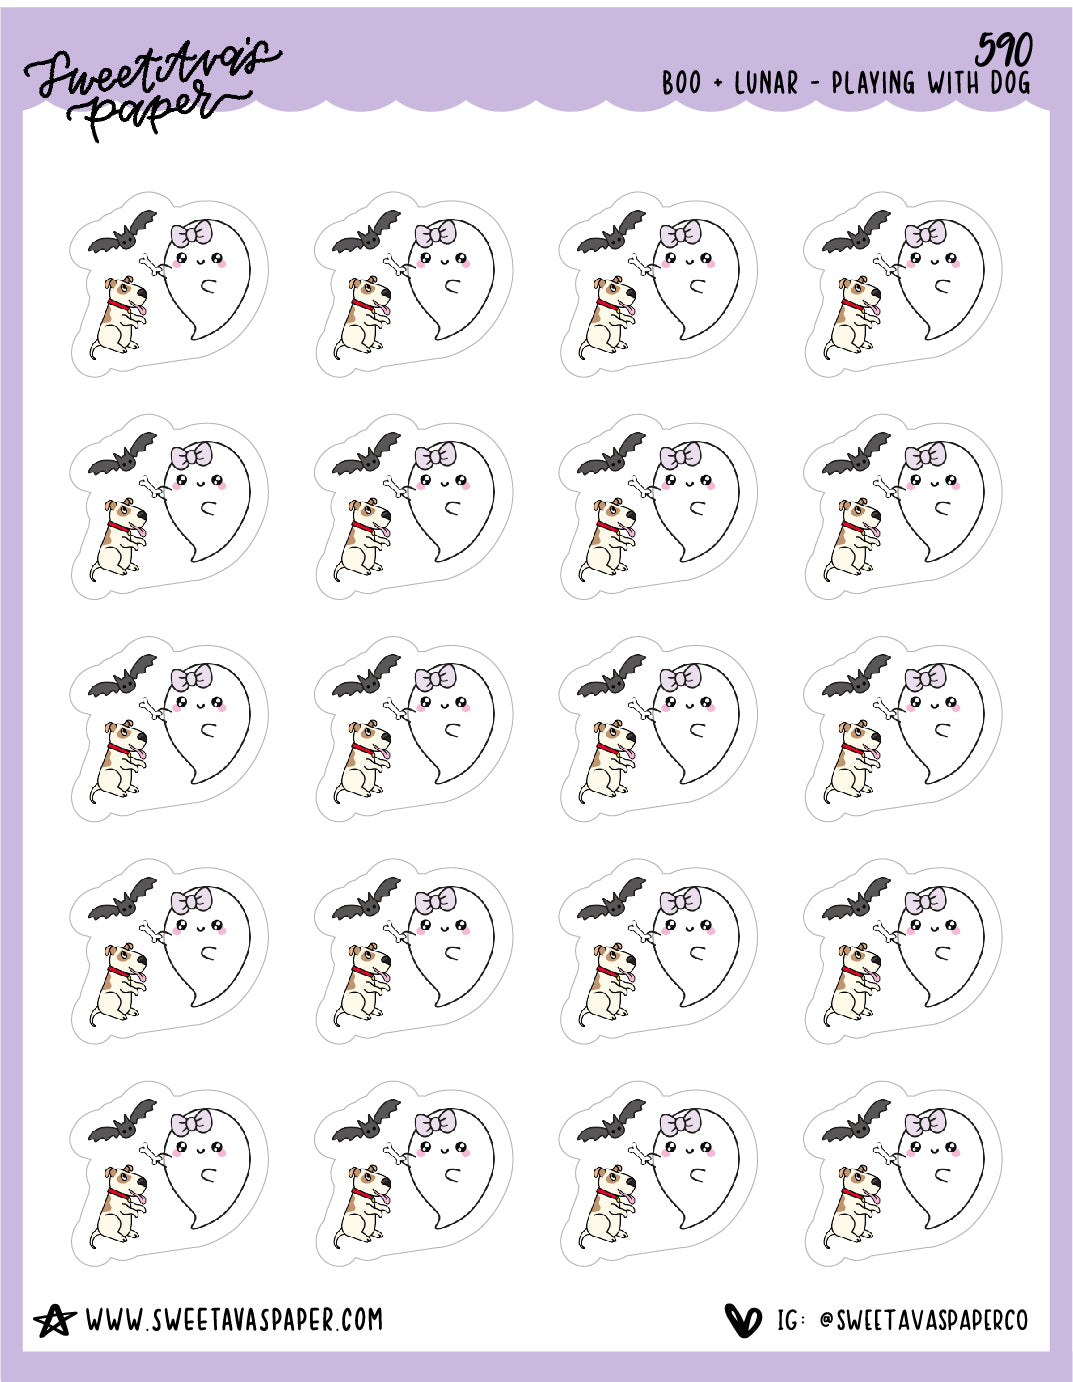 Playing With Dog Planner Stickers - Boo and Lunar [590]